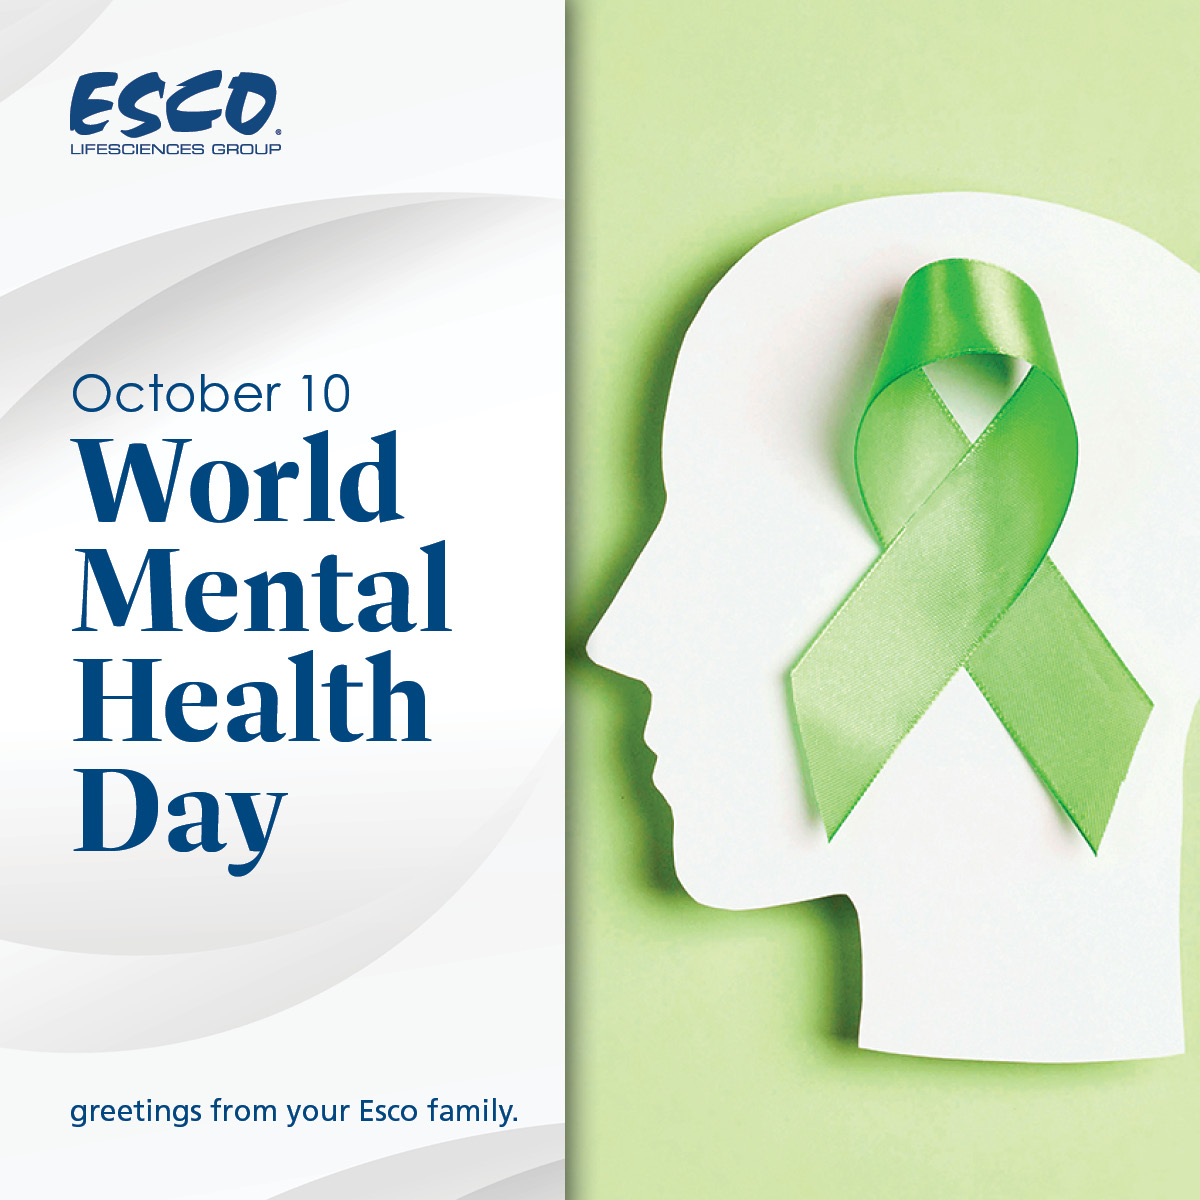 Mental health is an essential part of our overall well-being. Let's raise awareness and support each other today and every day. 💚

#EscoLifesciences #EscoCares #MentalHealthMatters #WellnessMatters #MentalHealthIsWealth